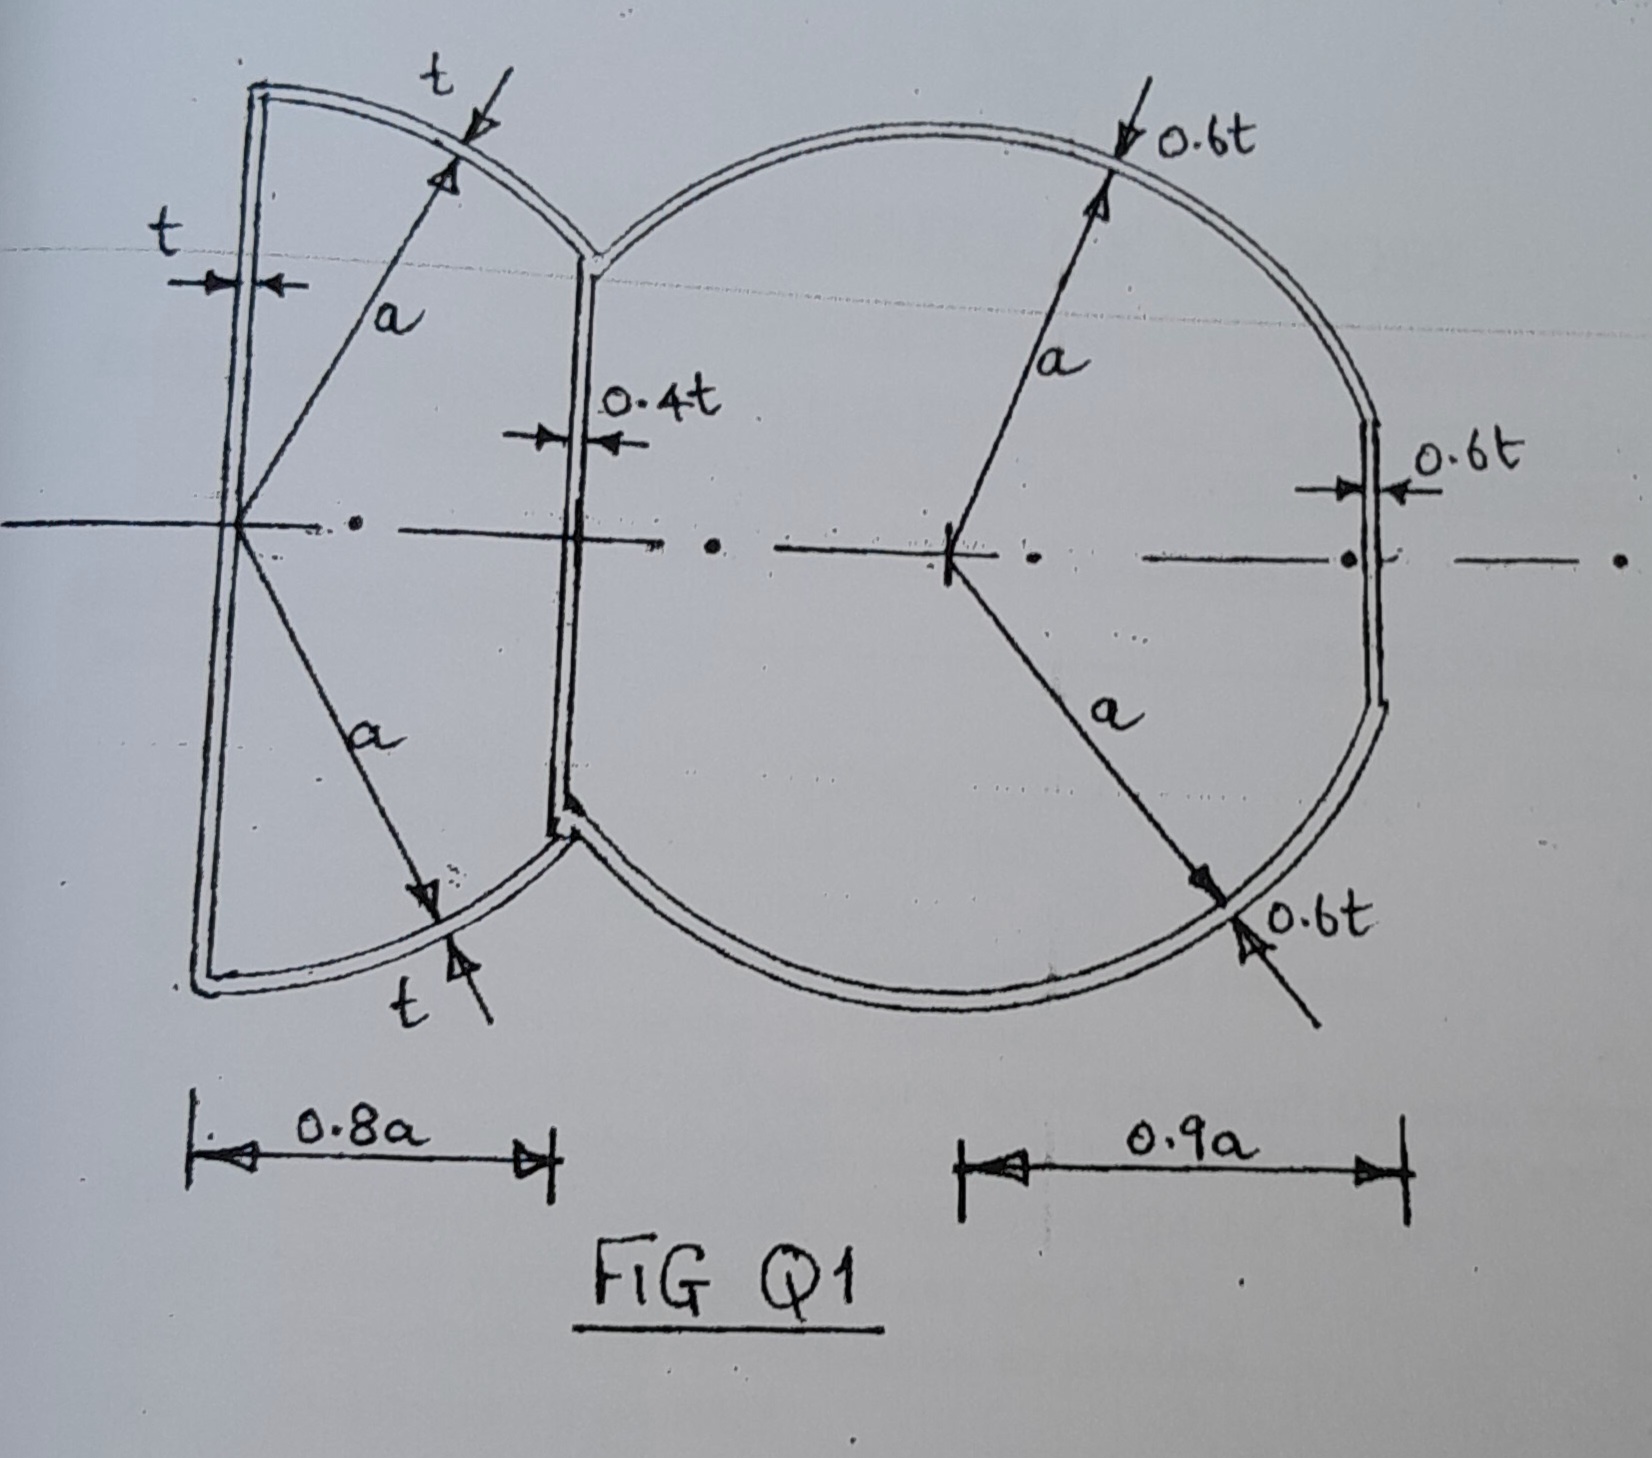 Solved Question 1 Fig Q1 shows a two-celled tube subjected | Chegg.com